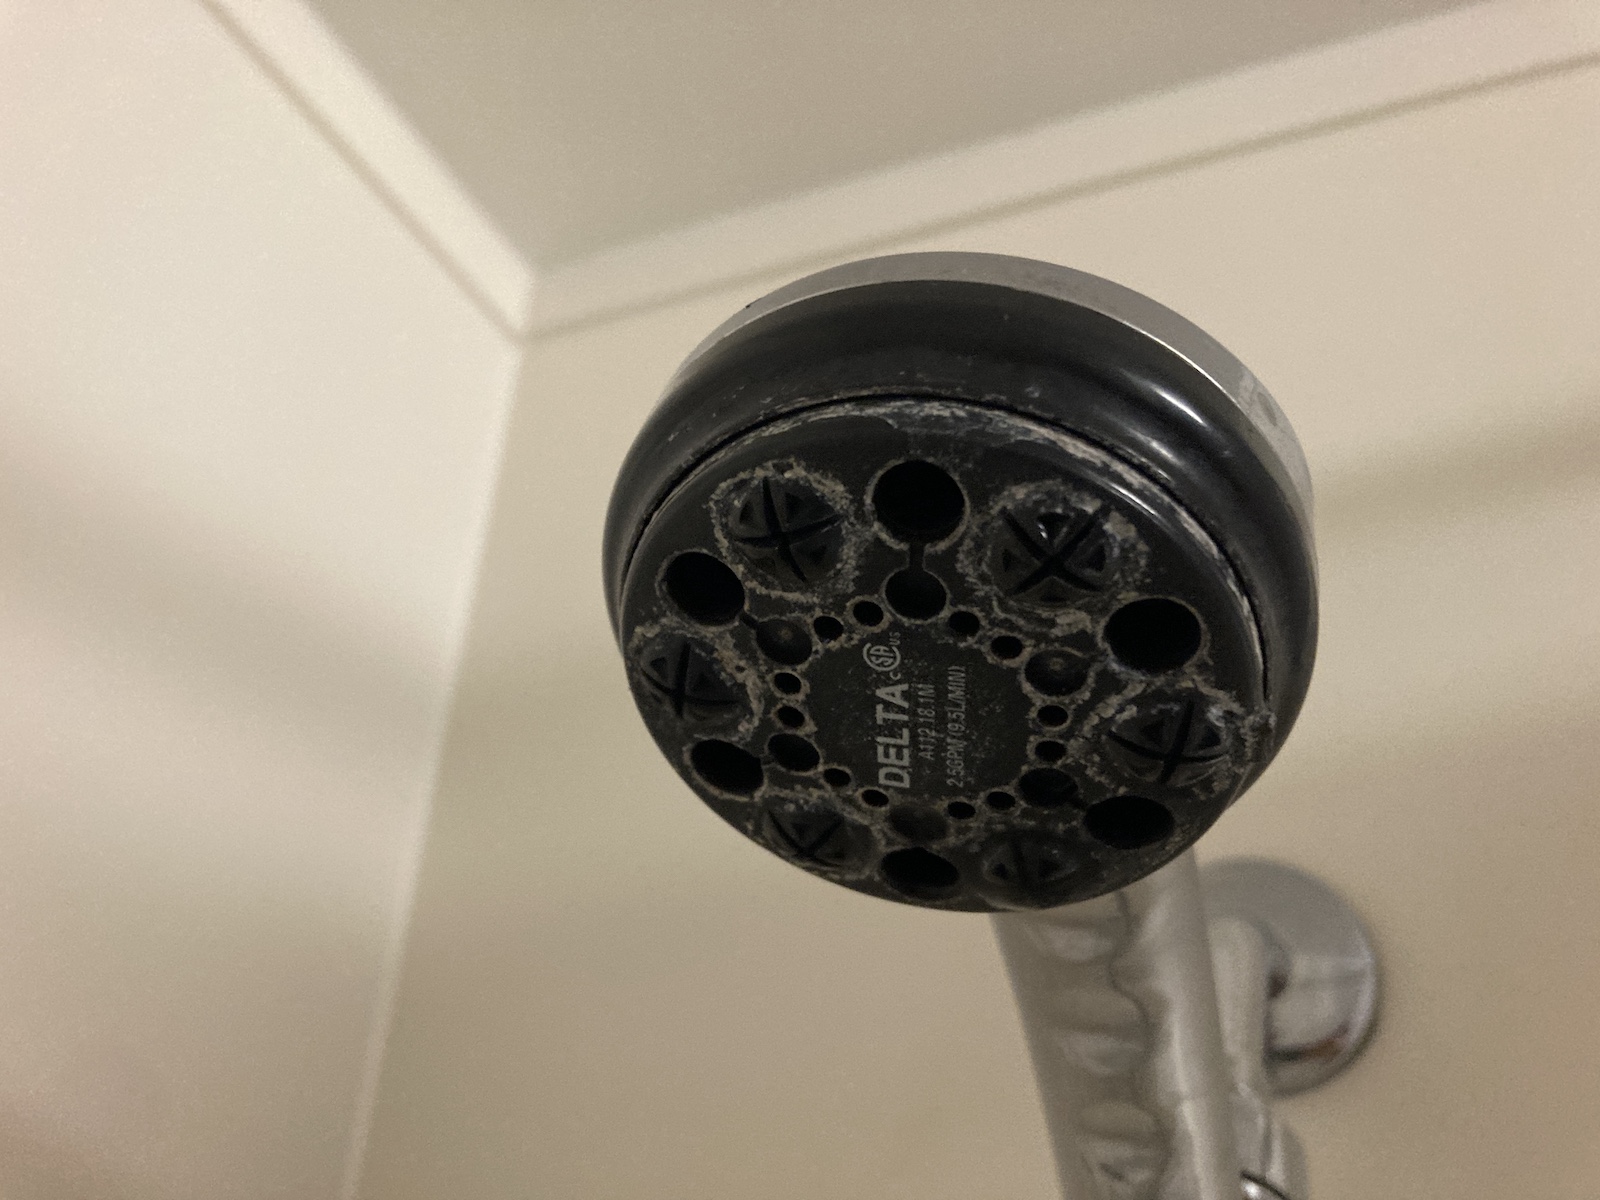 Image of shower head missing the piece where you can adjust the spray settings